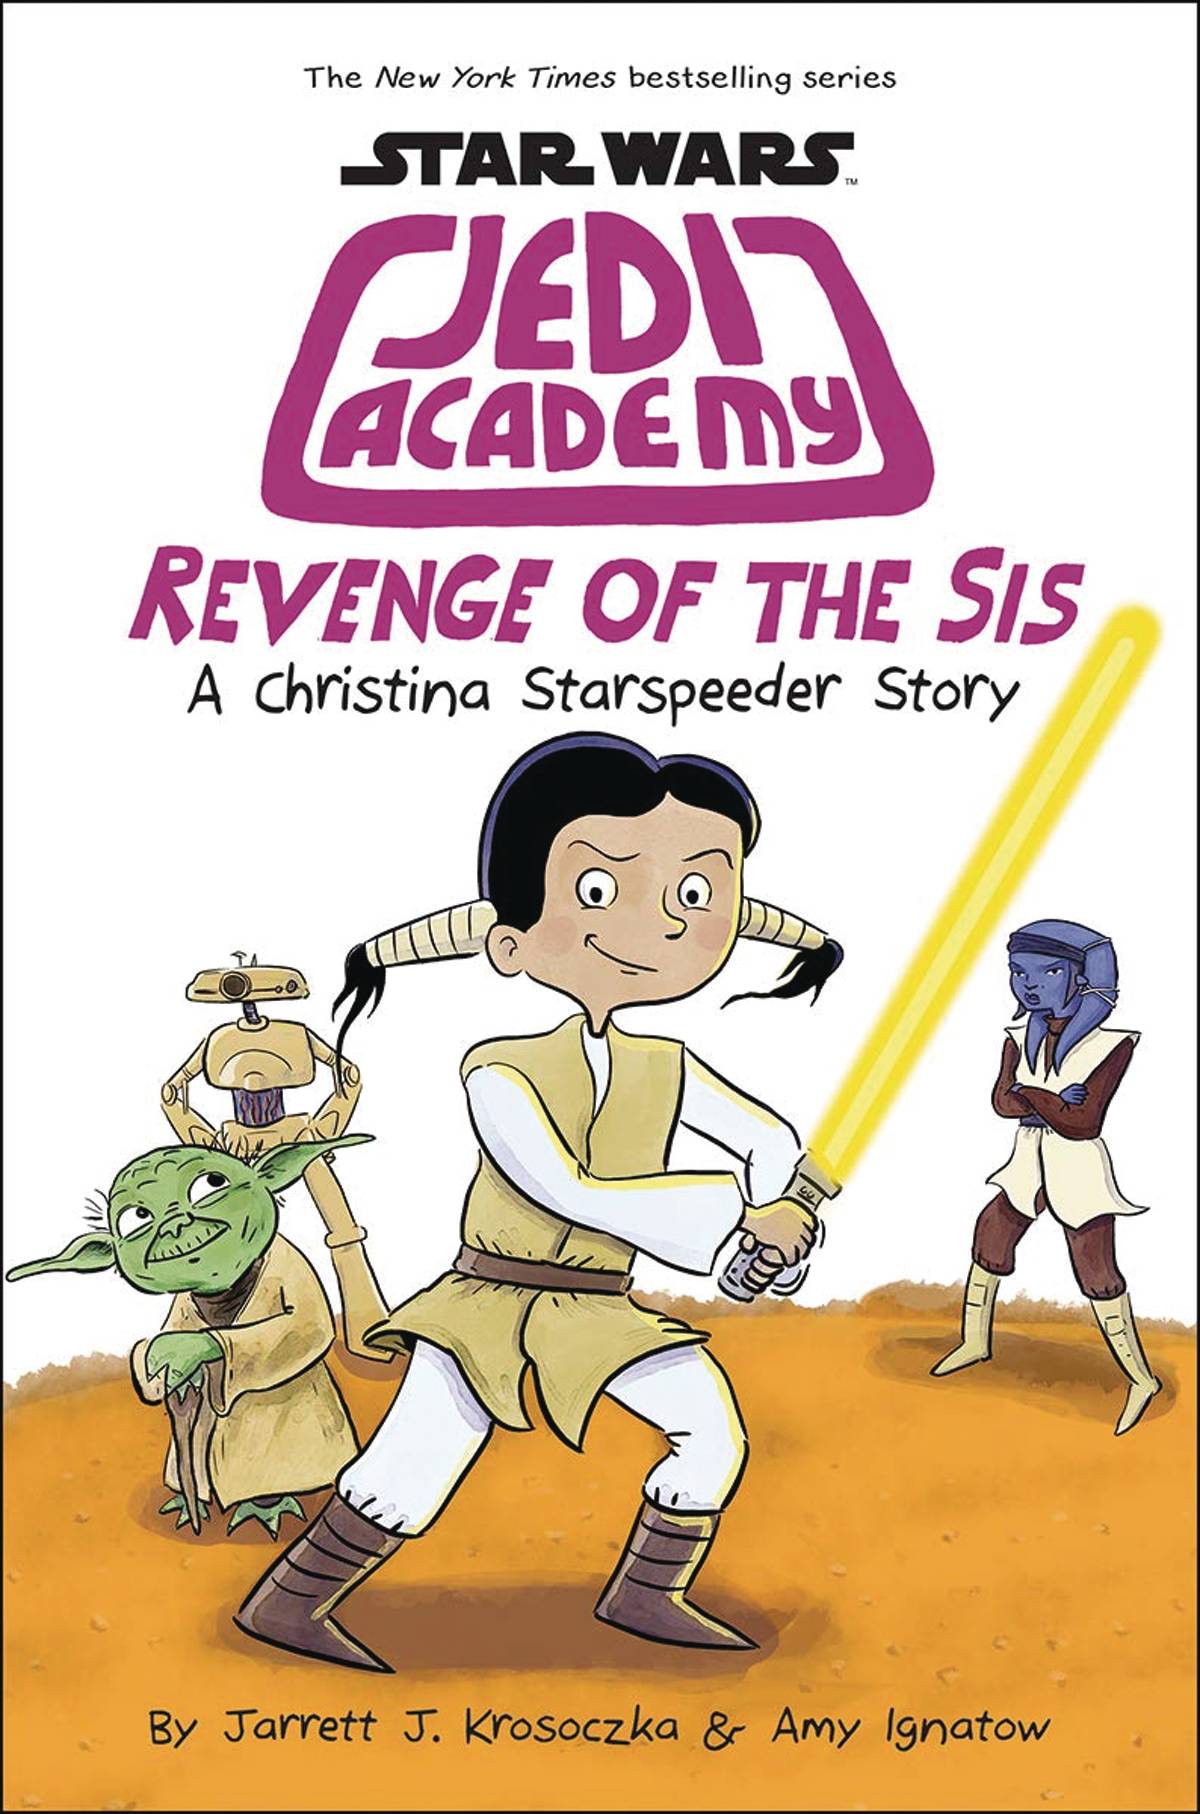 Star Wars Jedi Academy Young Reader Hardcover Volume 7 Revenge of the Sis